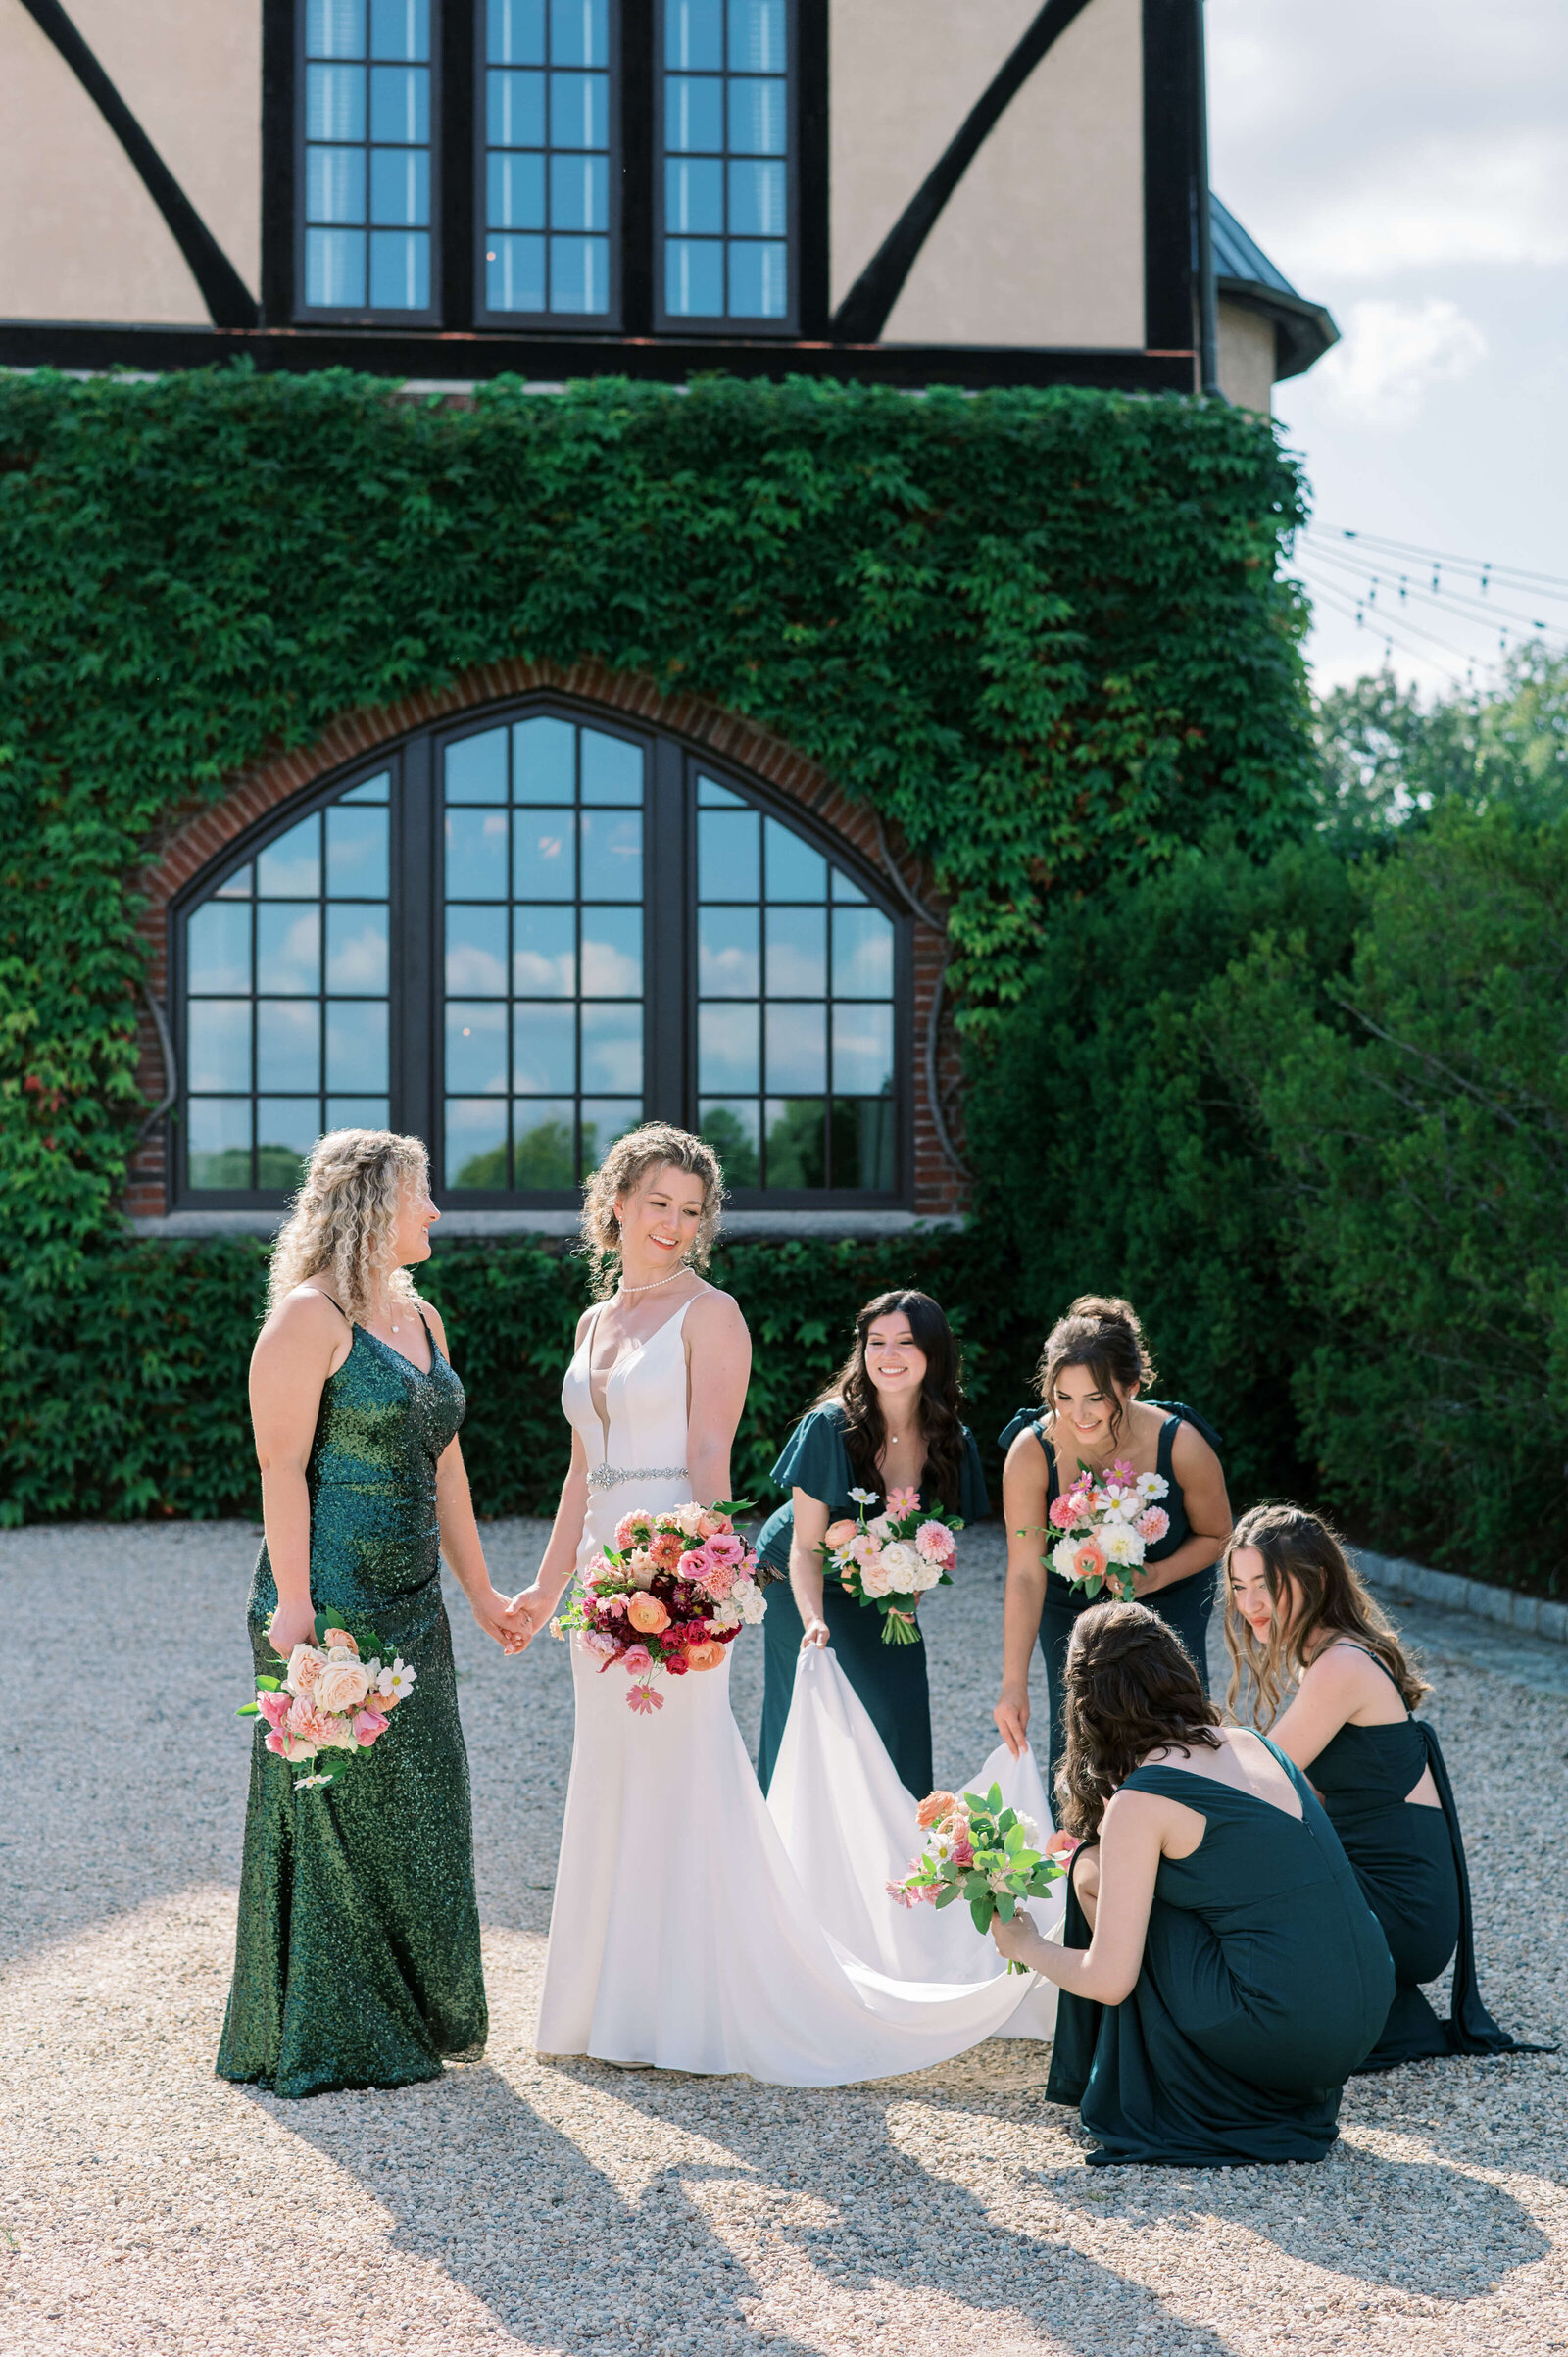 Bride in white dress smiles at her bridesmaids while they adjust her train. They are standing in front of a vine covered wall and have joyful expressions